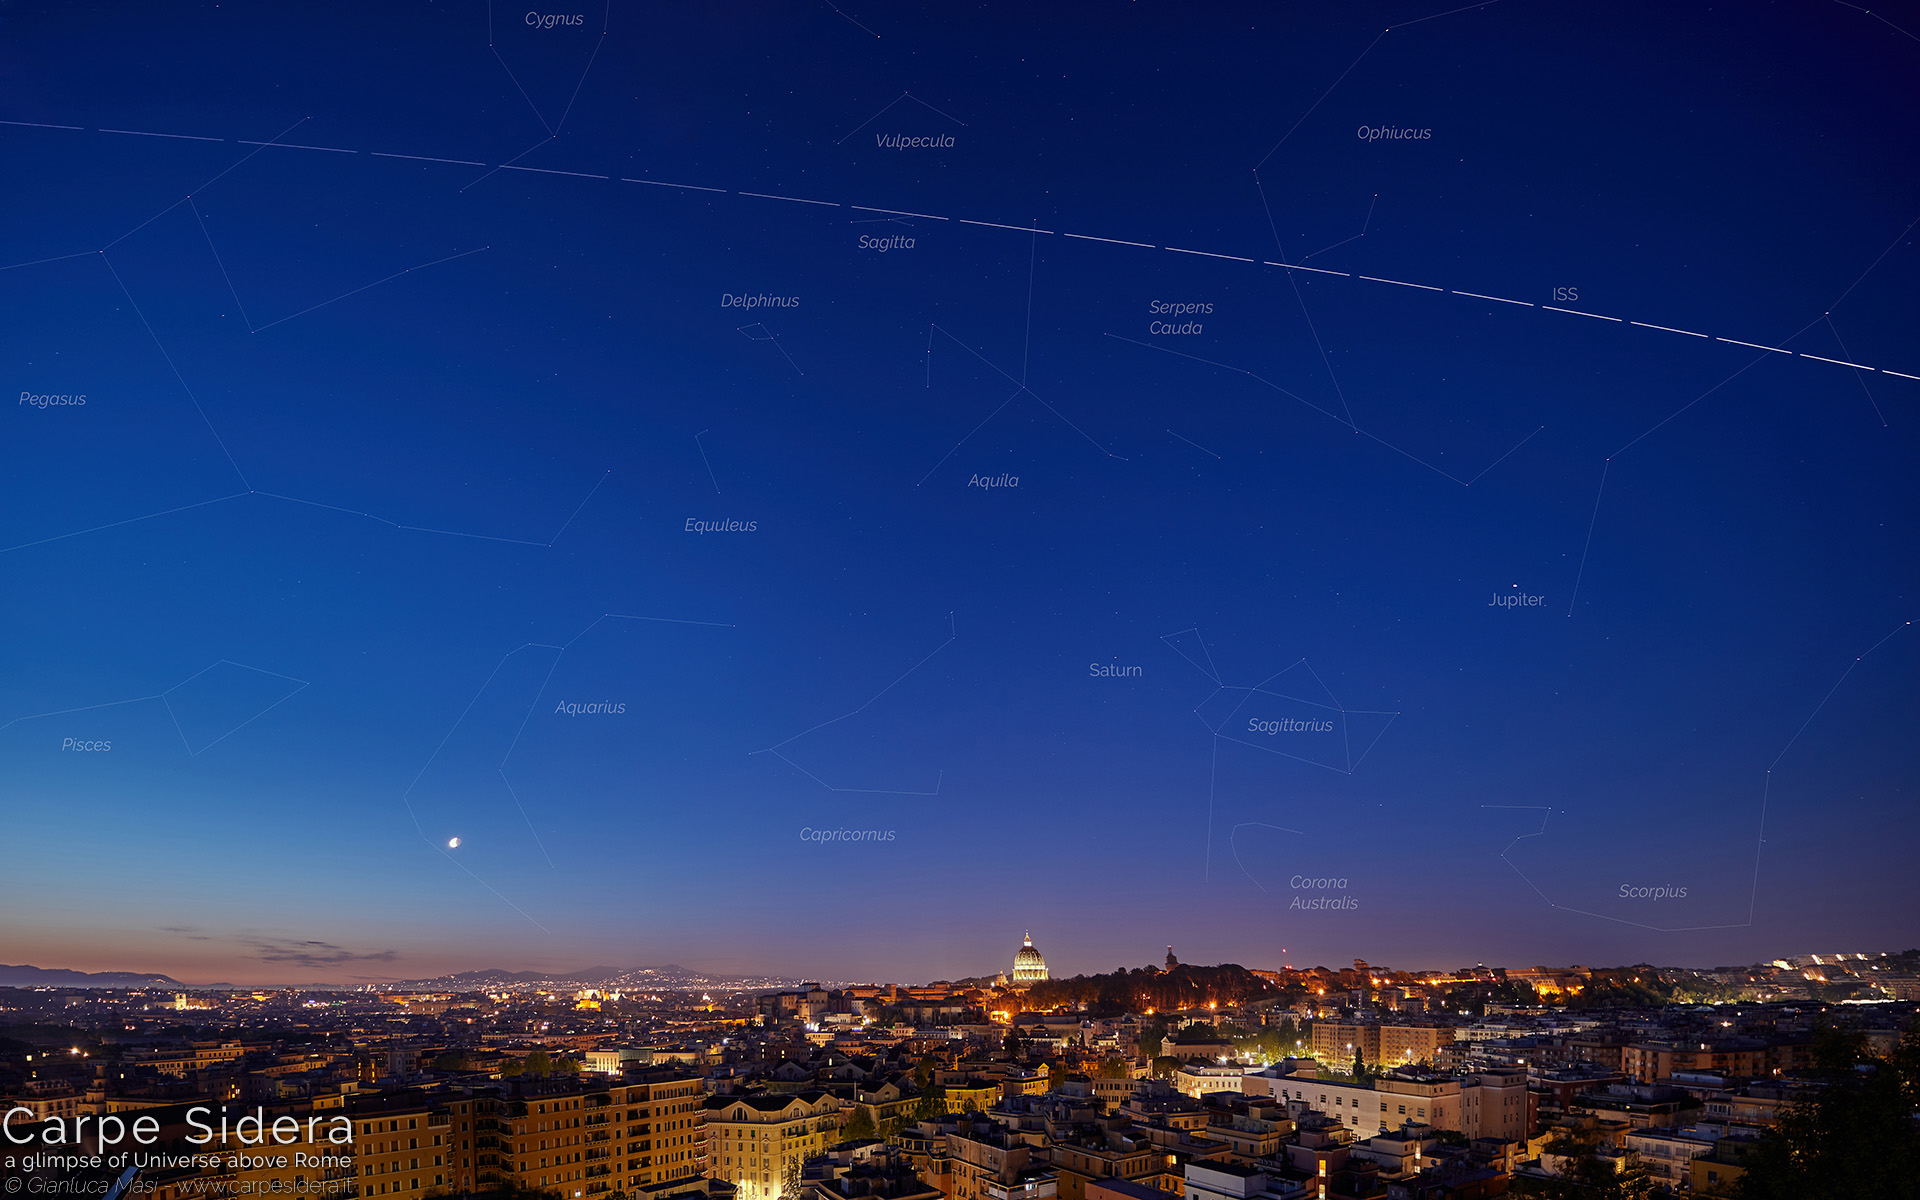 20. The International Space Station (ISS) flies above the Eternal City, among the stars and the constellations.